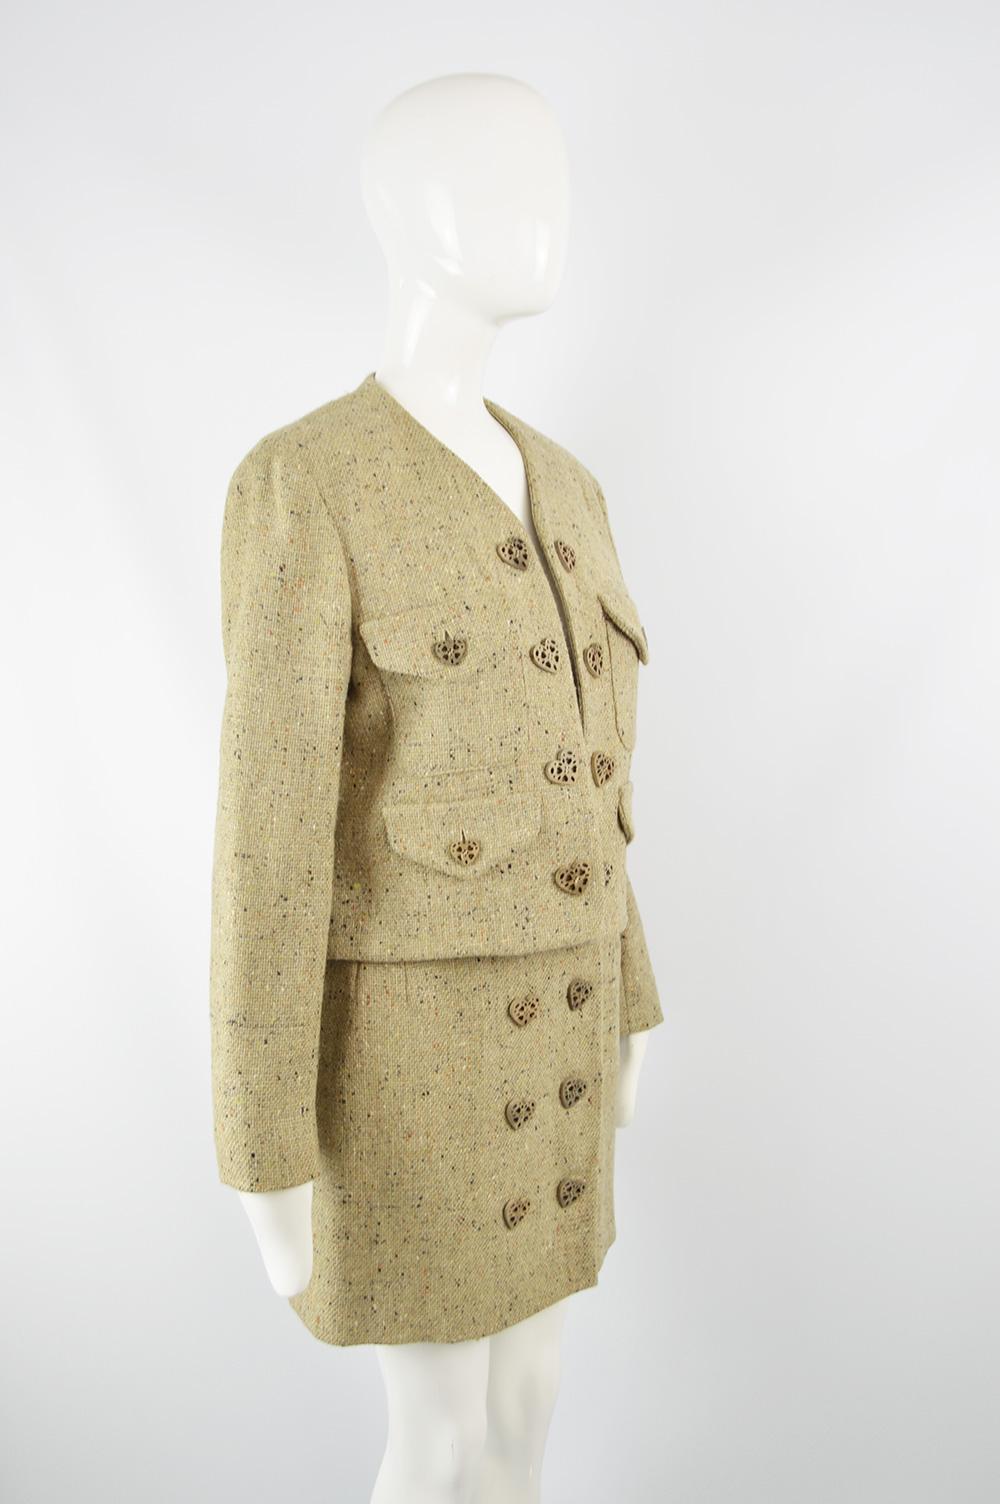 Women's Moschino Vintage Wool Tweed 2 Piece Jacket & Skirt Suit with Heart Button, 1990s For Sale